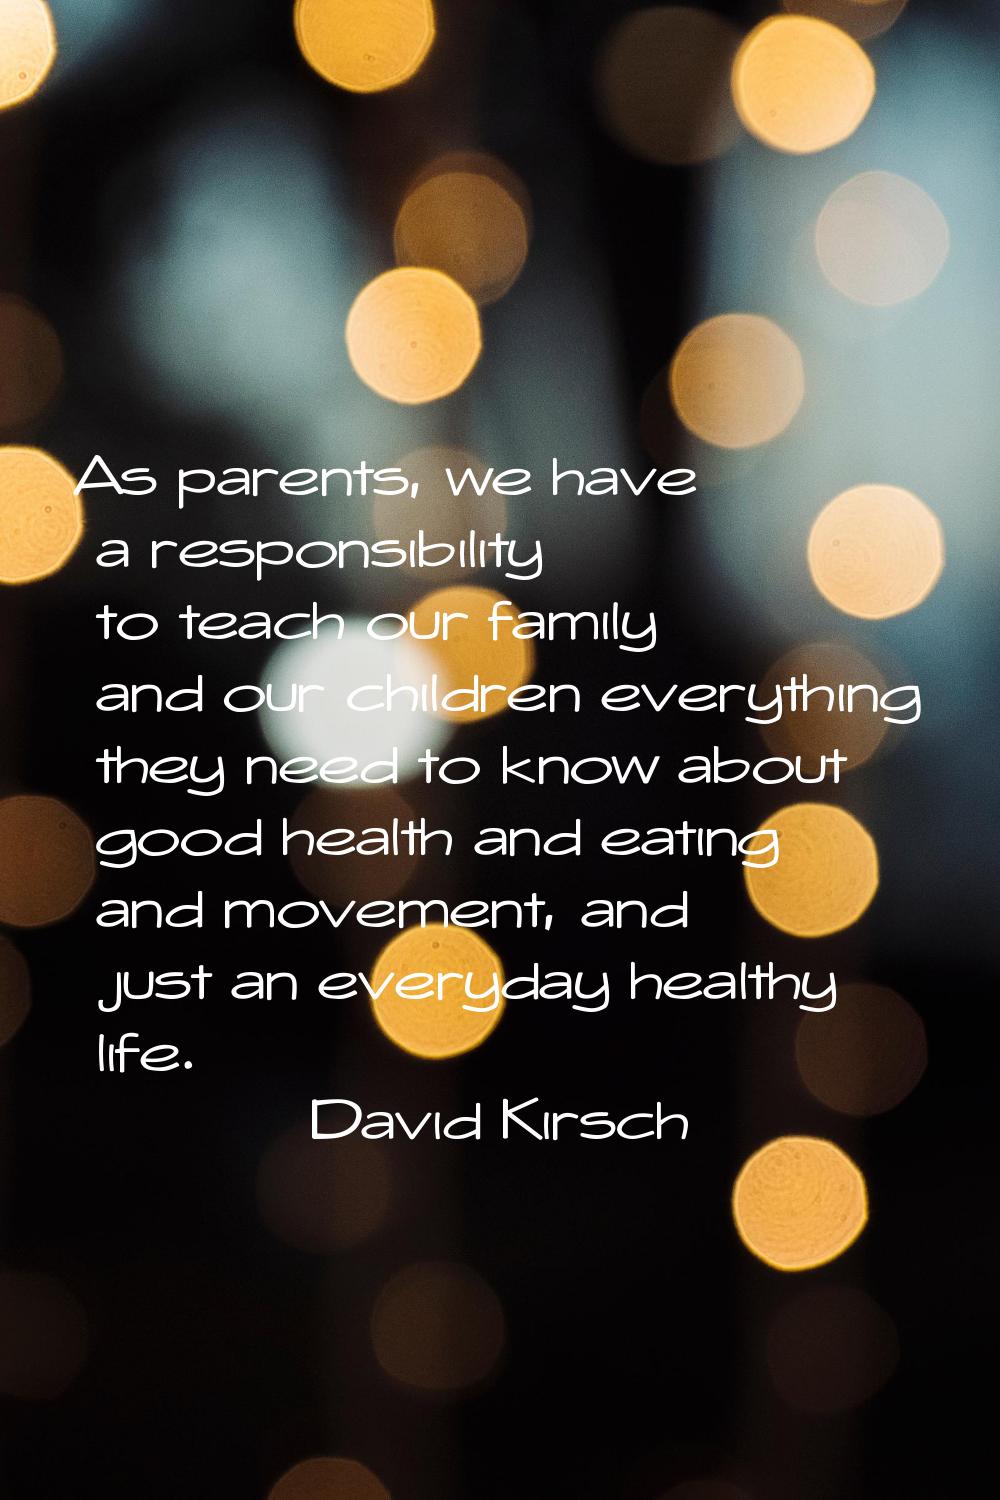 As parents, we have a responsibility to teach our family and our children everything they need to k